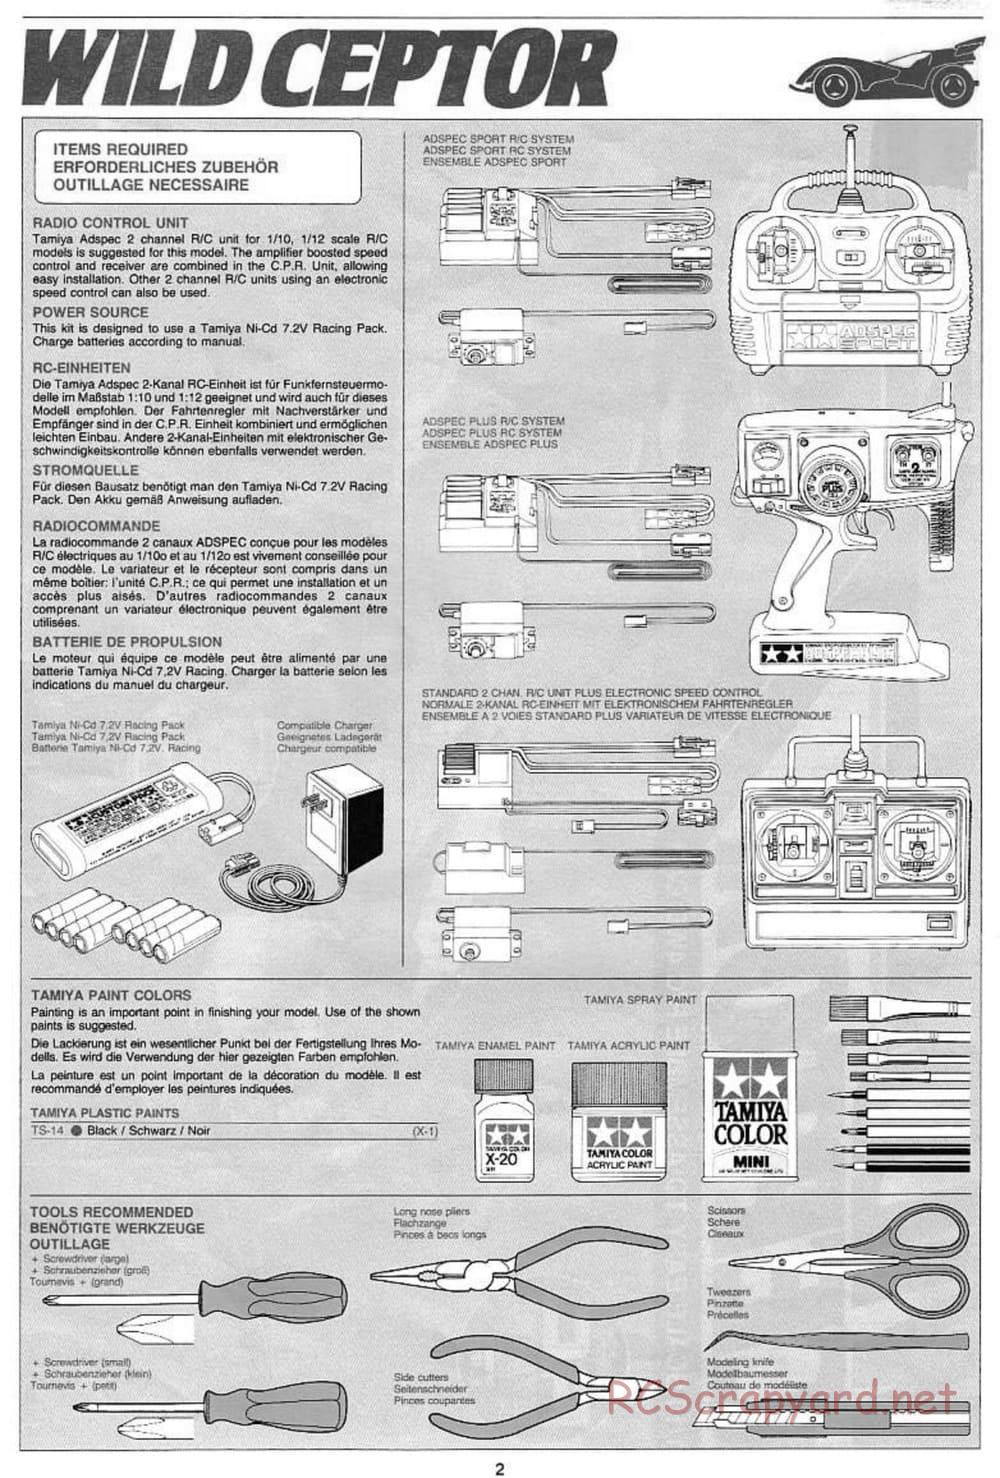 Tamiya - Wild Ceptor - Boy's 4WD Chassis - Manual - Page 2